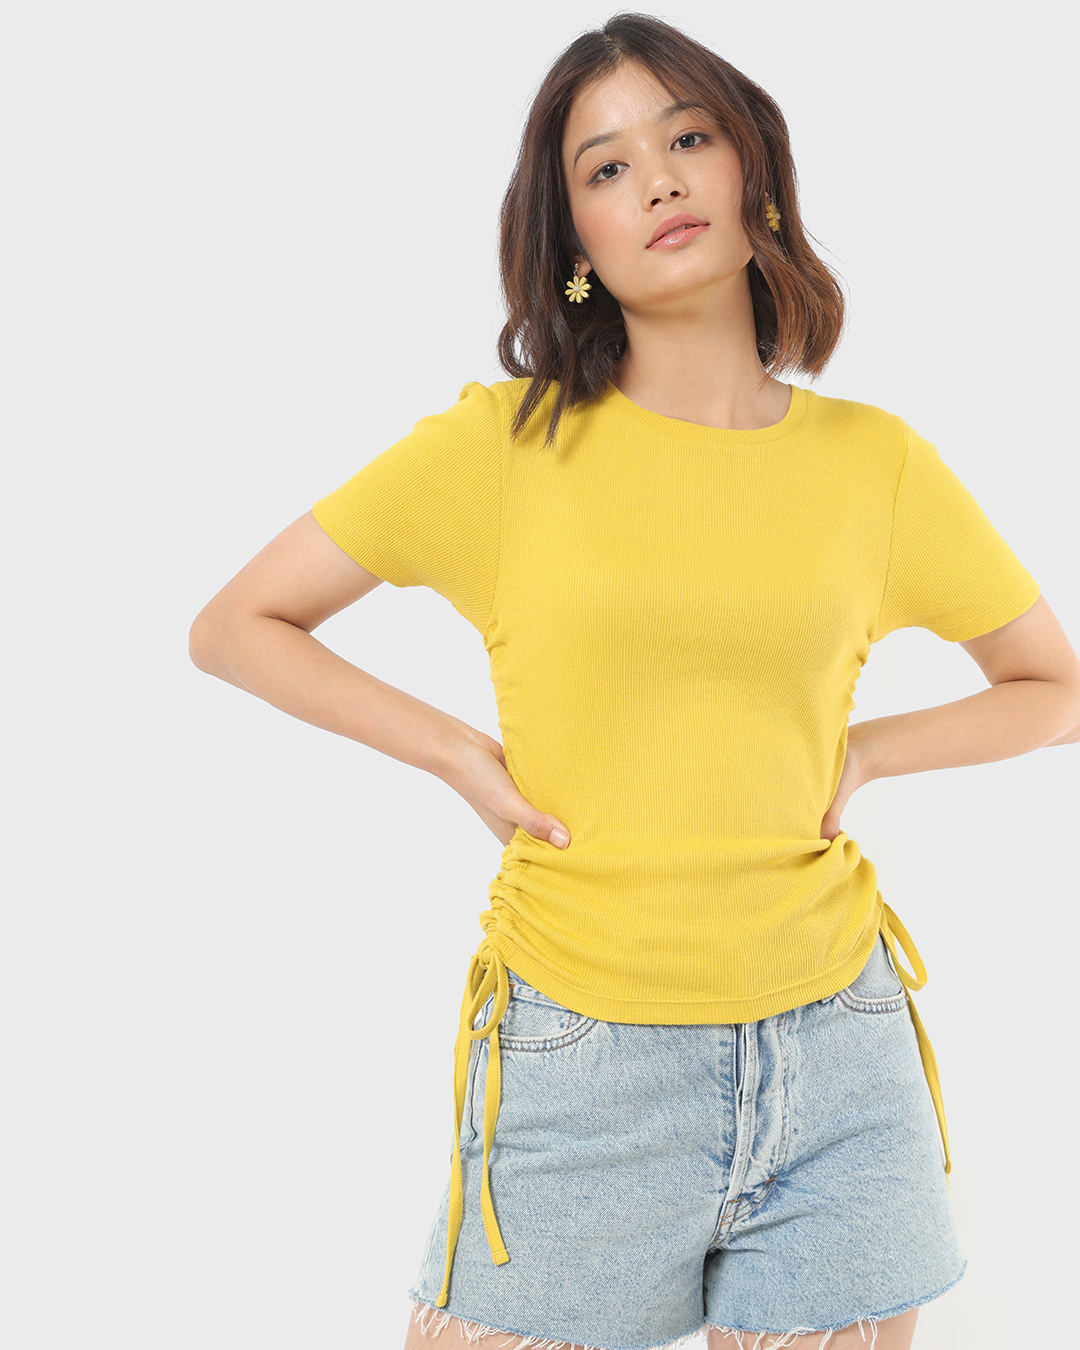 Shop Women's Yellow Size gather Slim Fit Top-Back